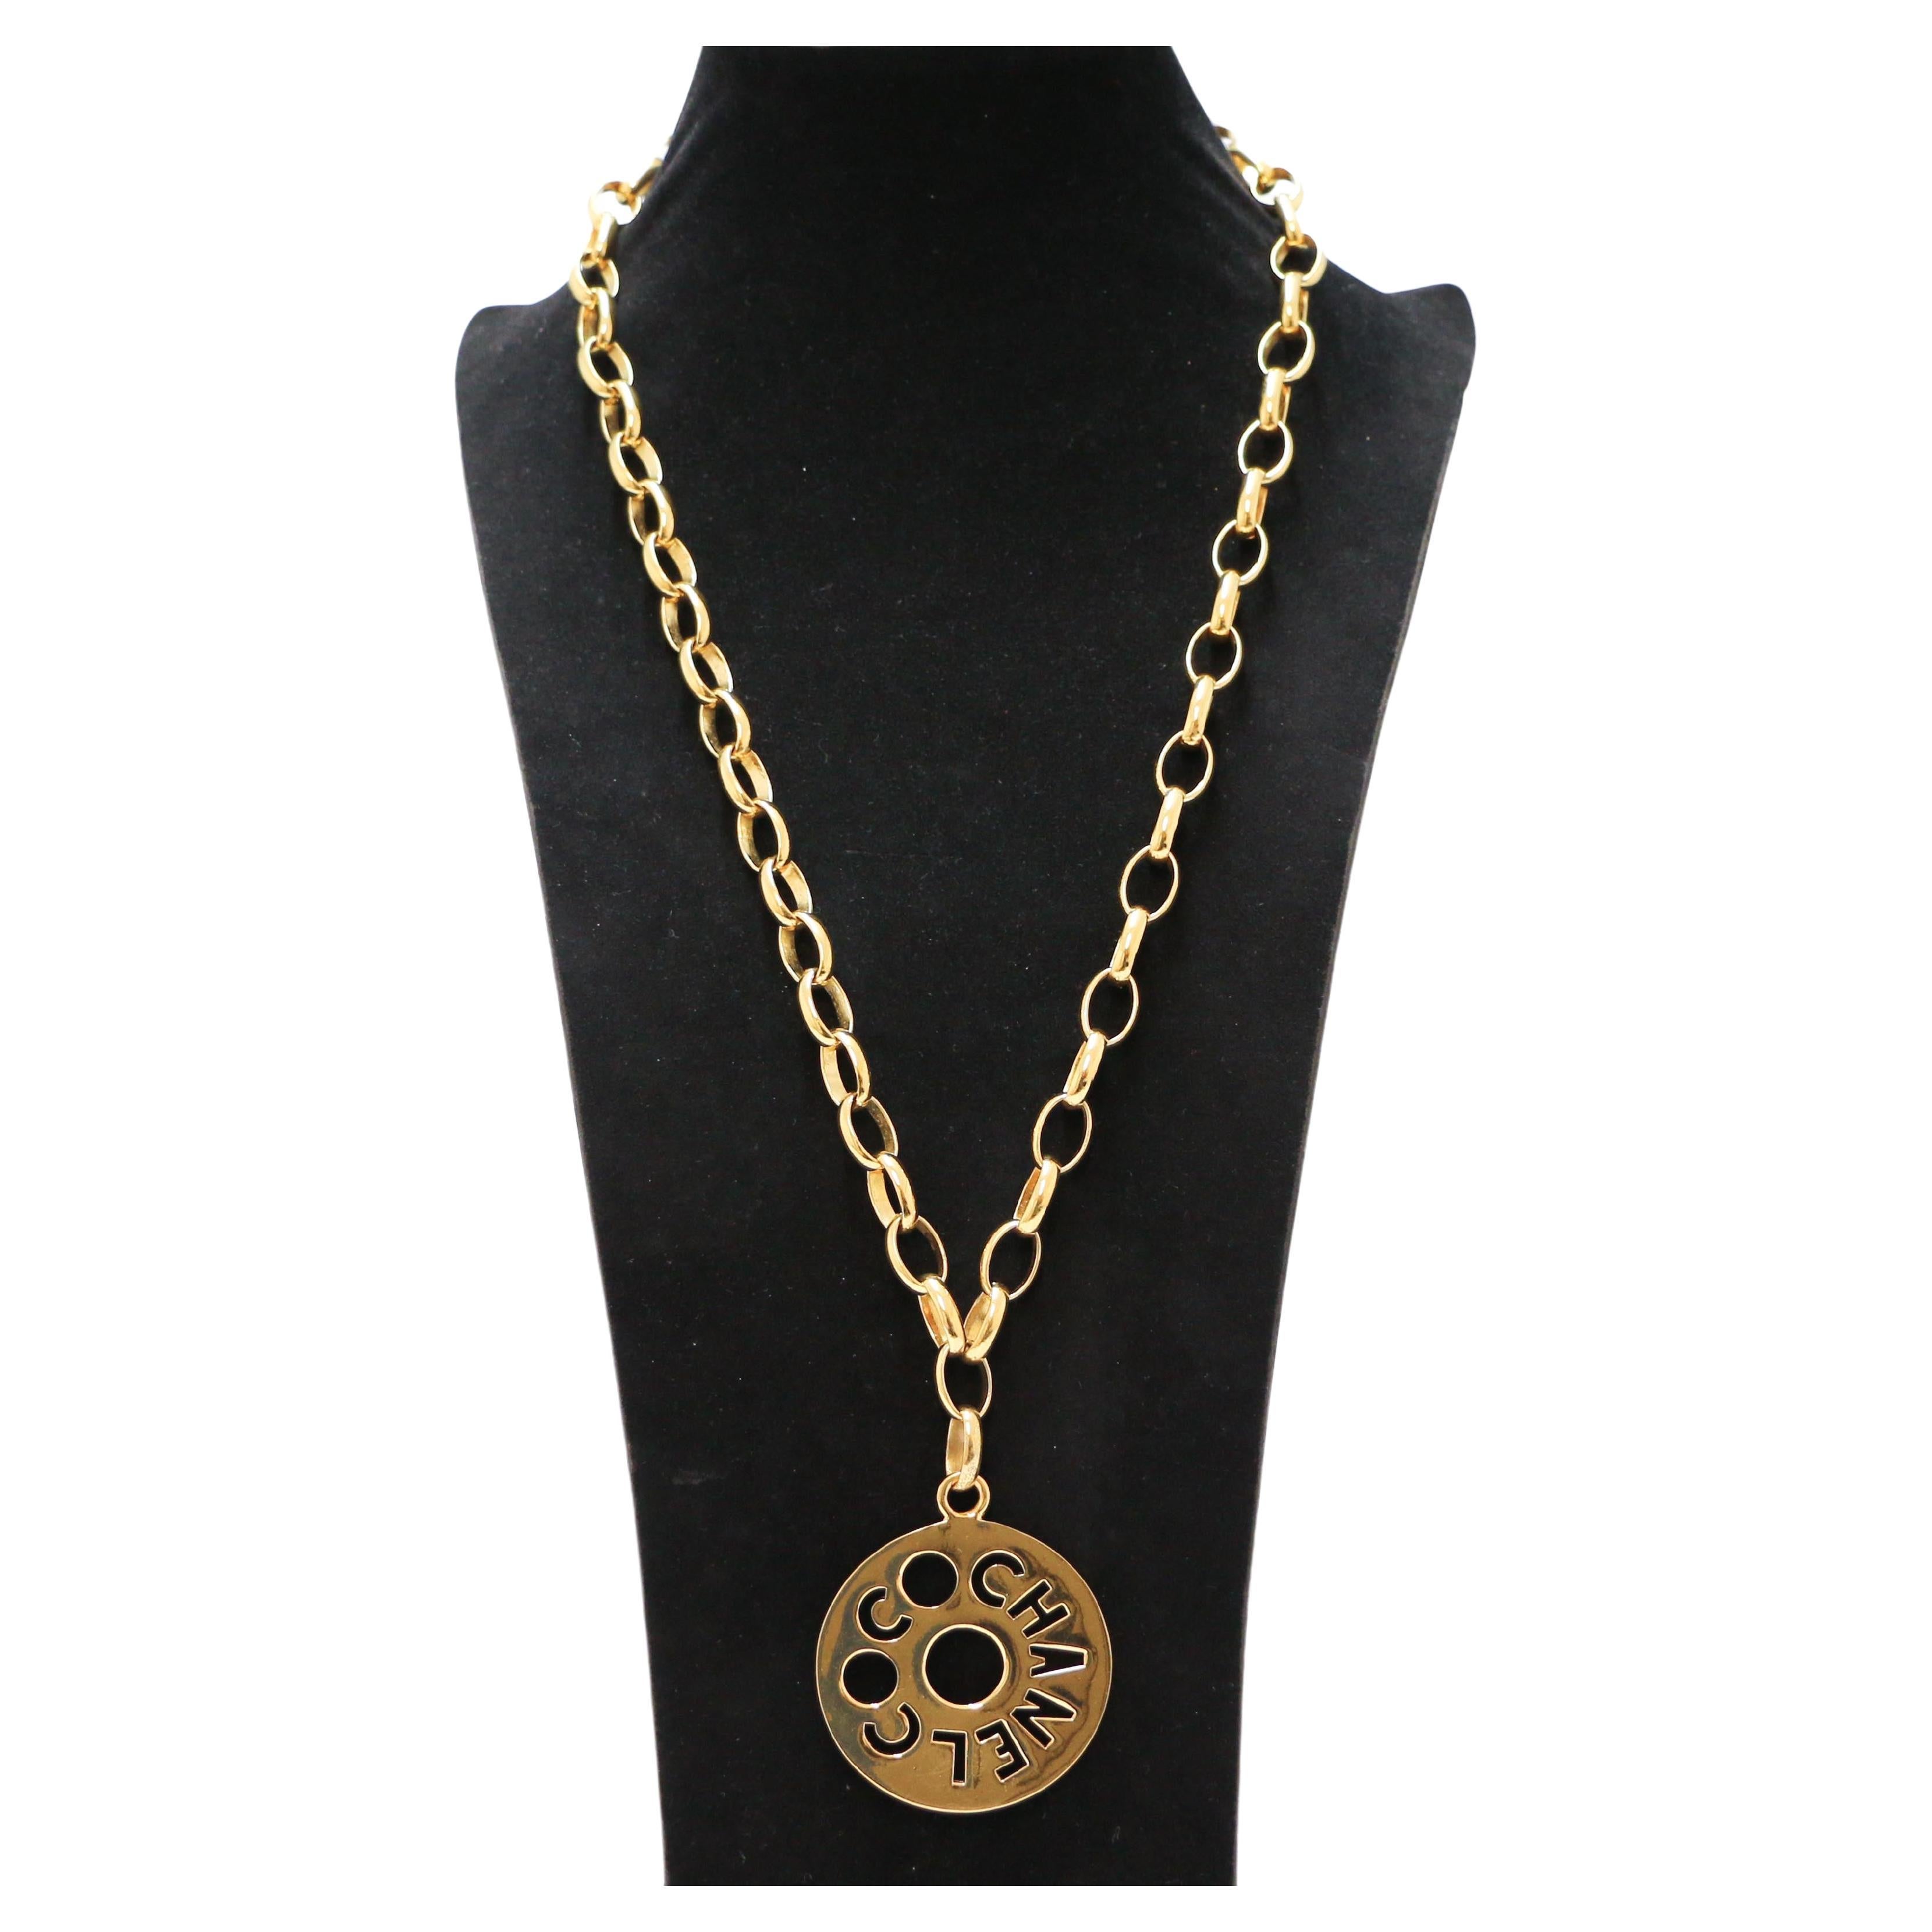 Vintage COCO CHANEL Necklace For Sale